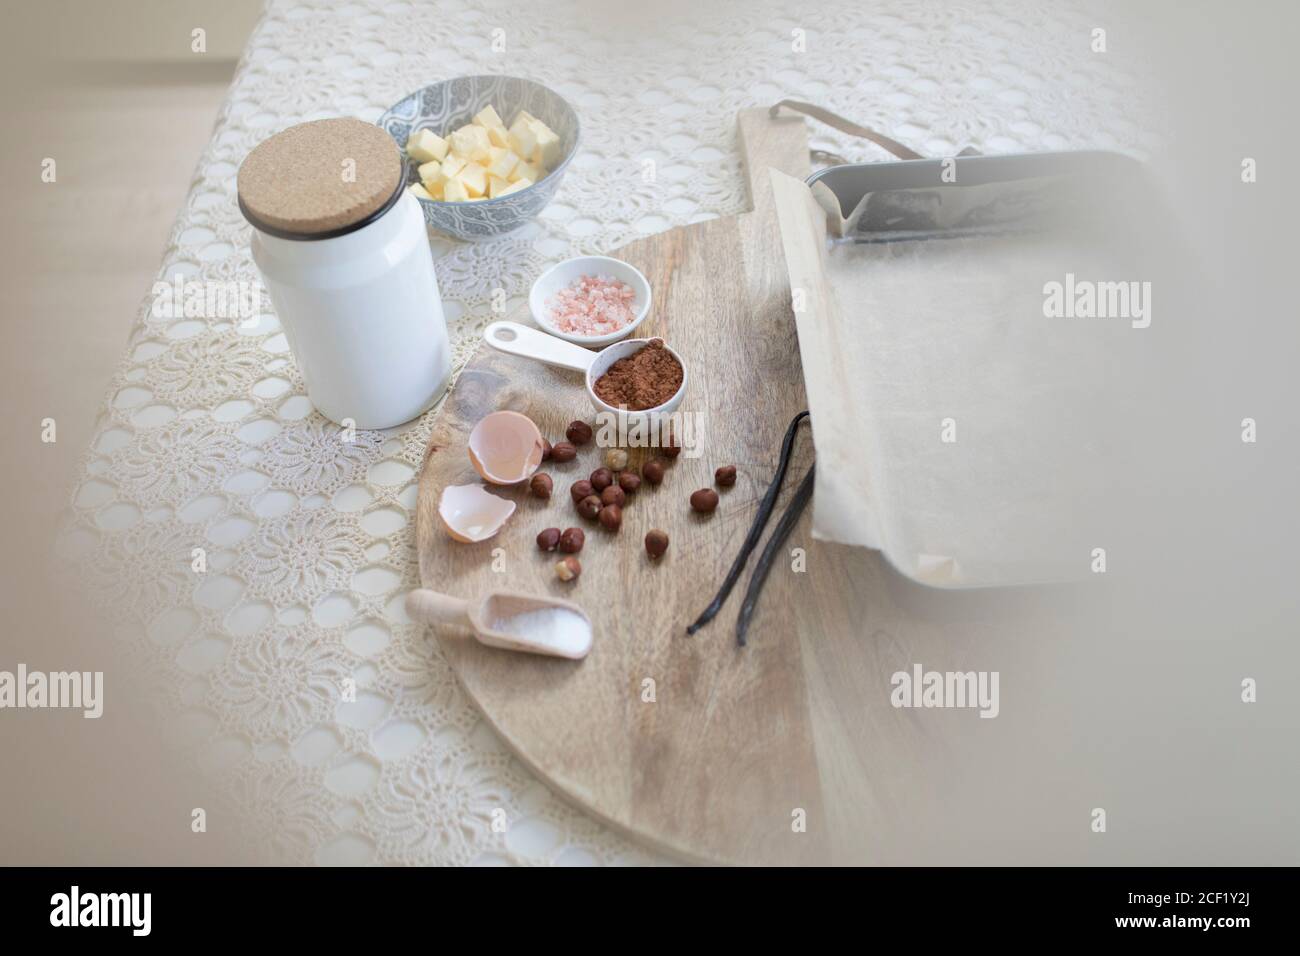 Baking ingredients on cutting board and table Stock Photo